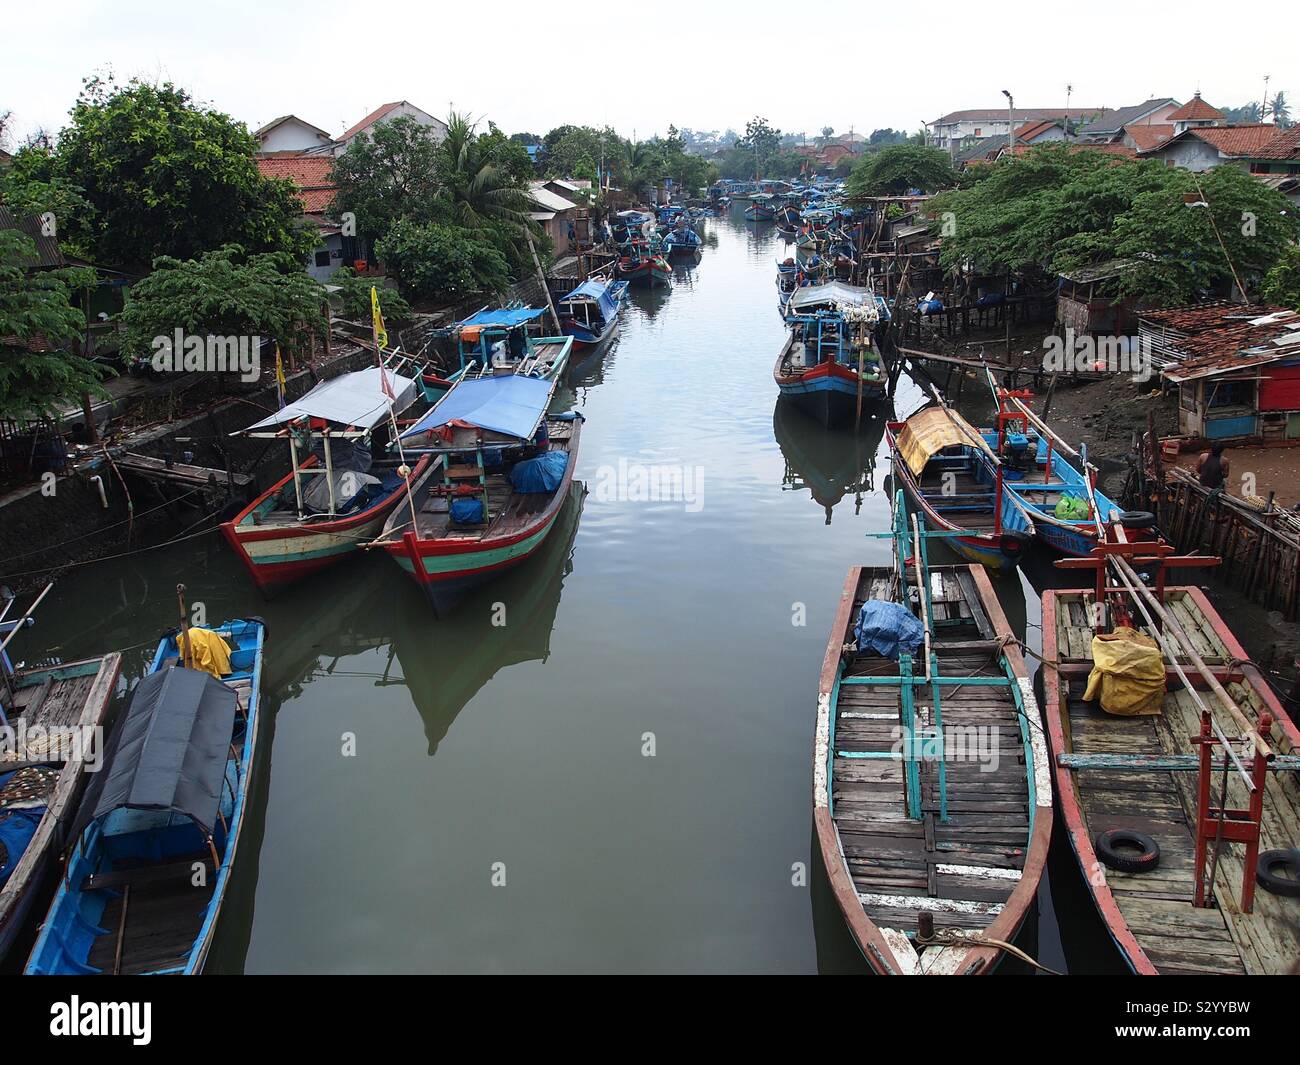 Kaliyasa or Yasa river is one of the rivers in the city of Cilacap,central Java-Indonesia and some traditional boats can be seen. Stock Photo